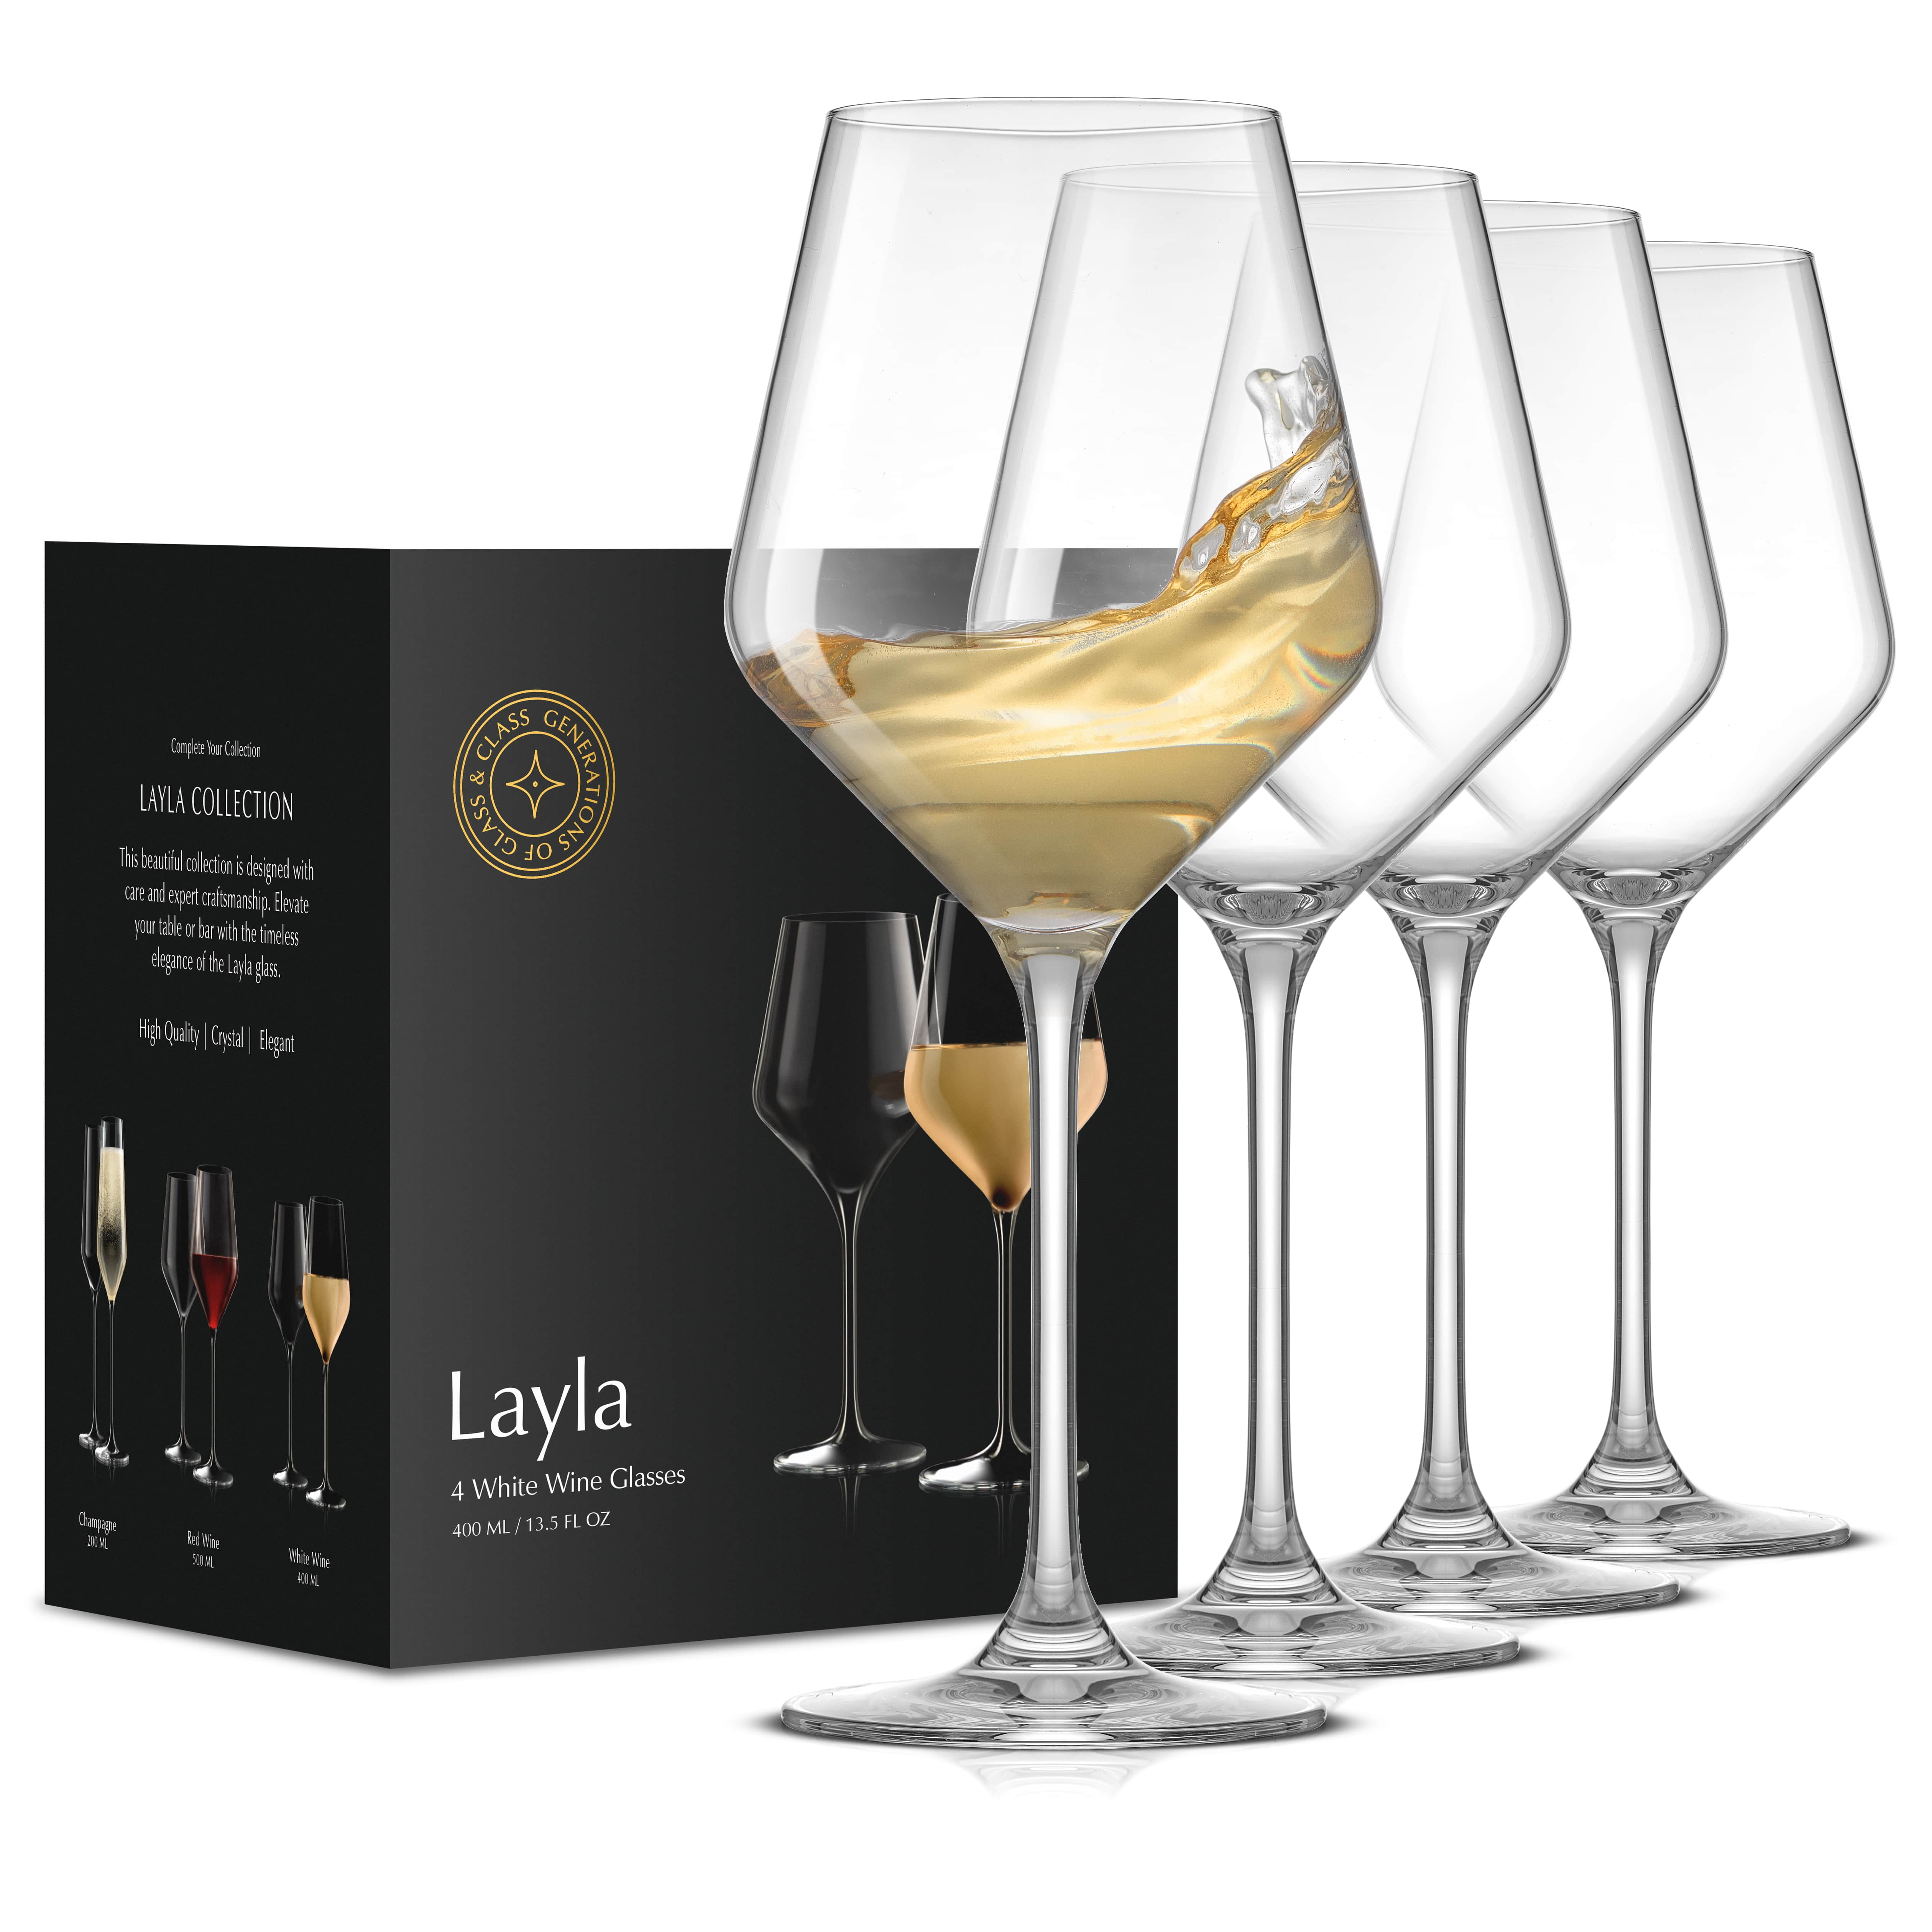 26oz Giant Wine Glass Gold : Target